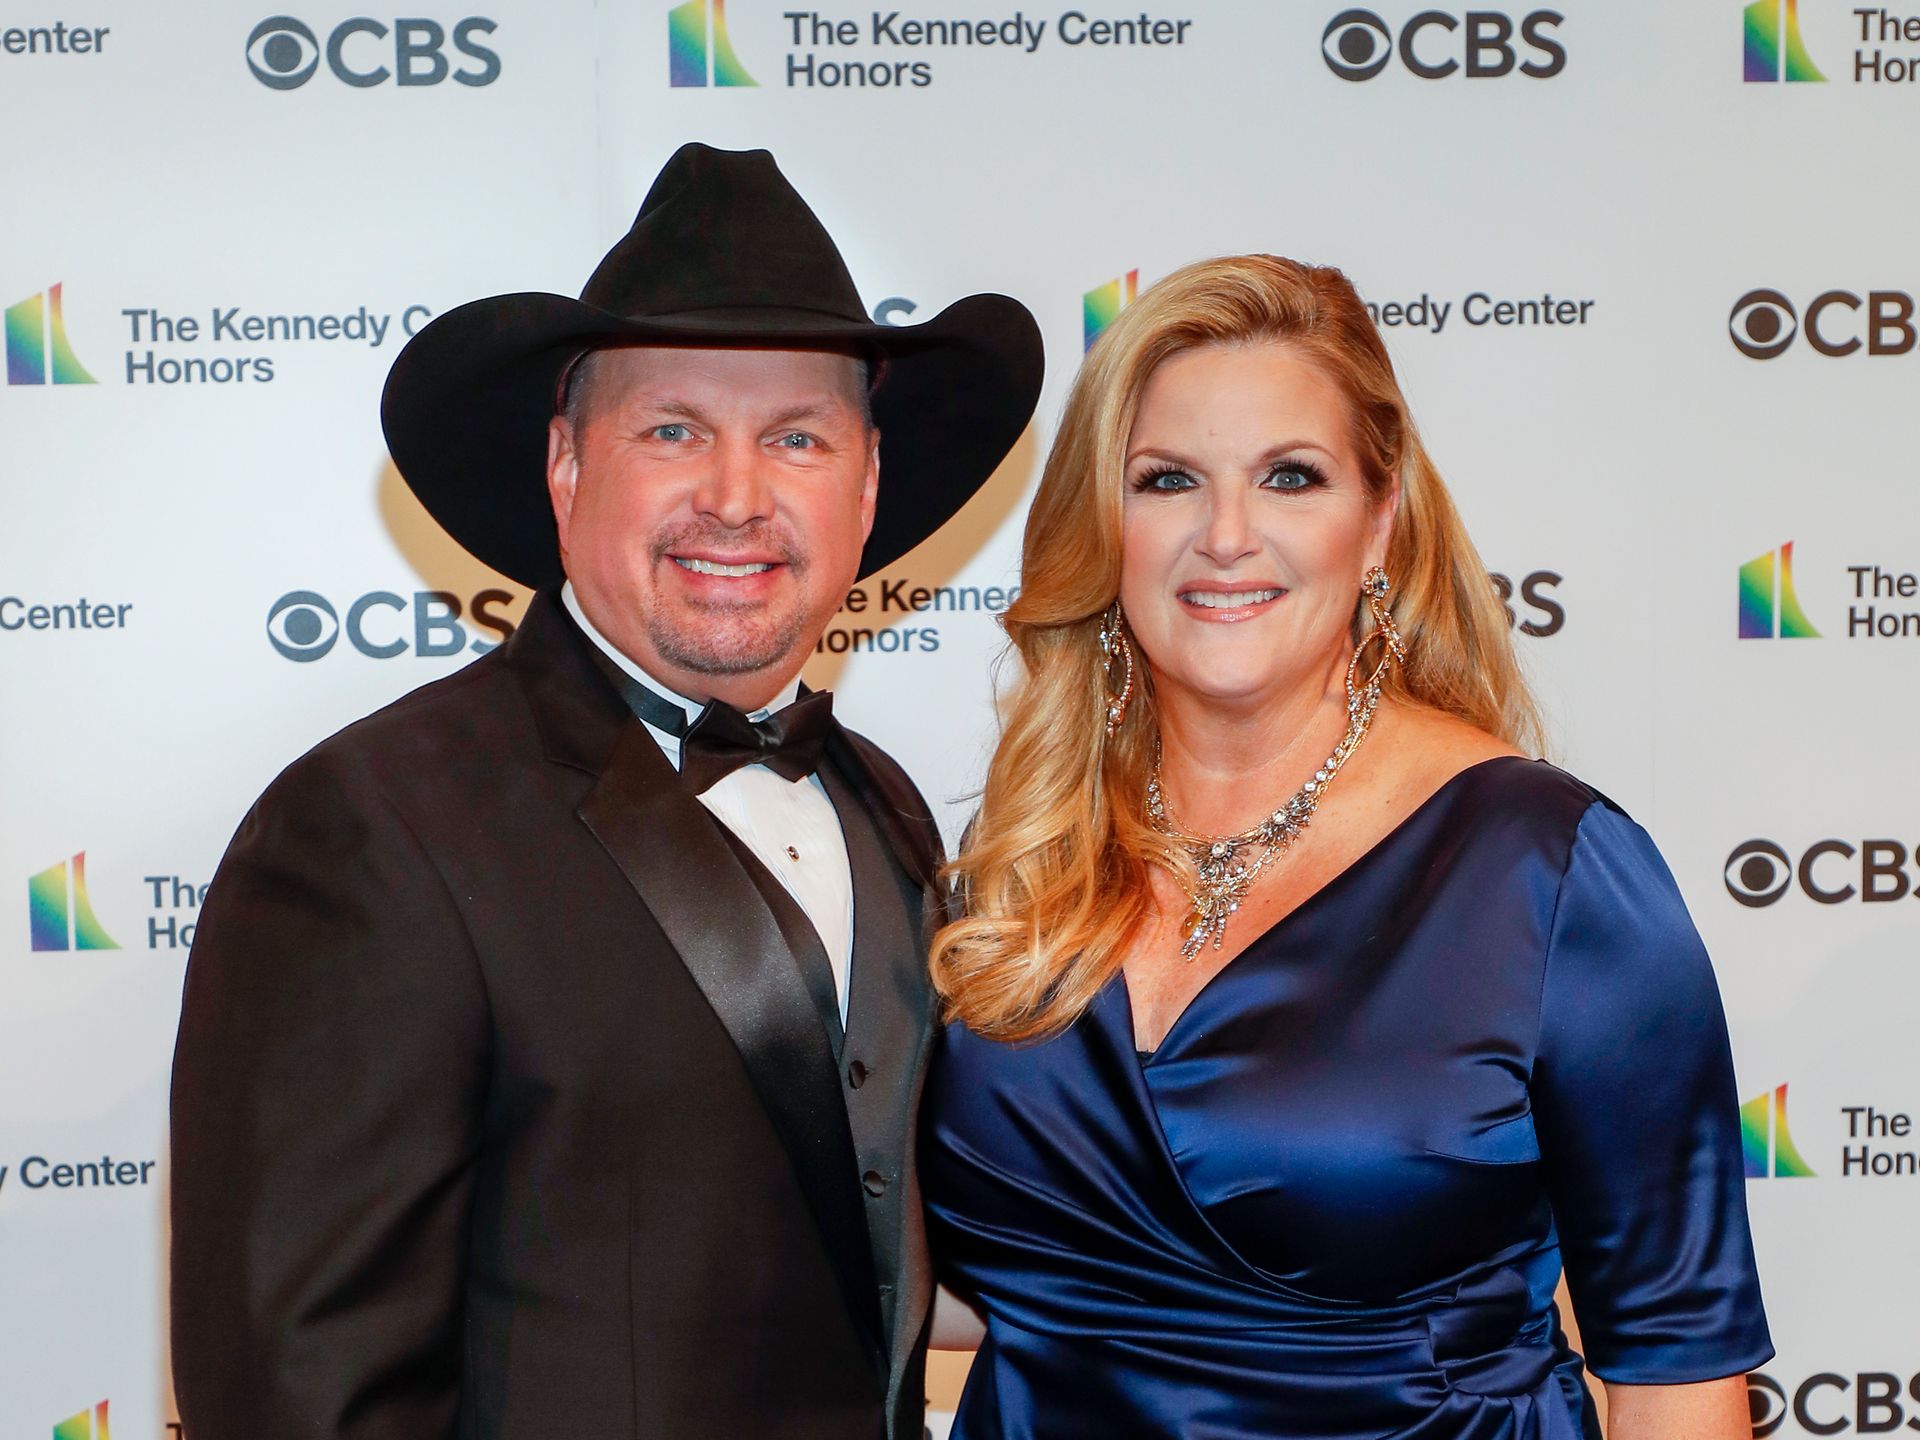 Garth Brooks' unrecognizable weight loss transformation: How he lost 50lbs